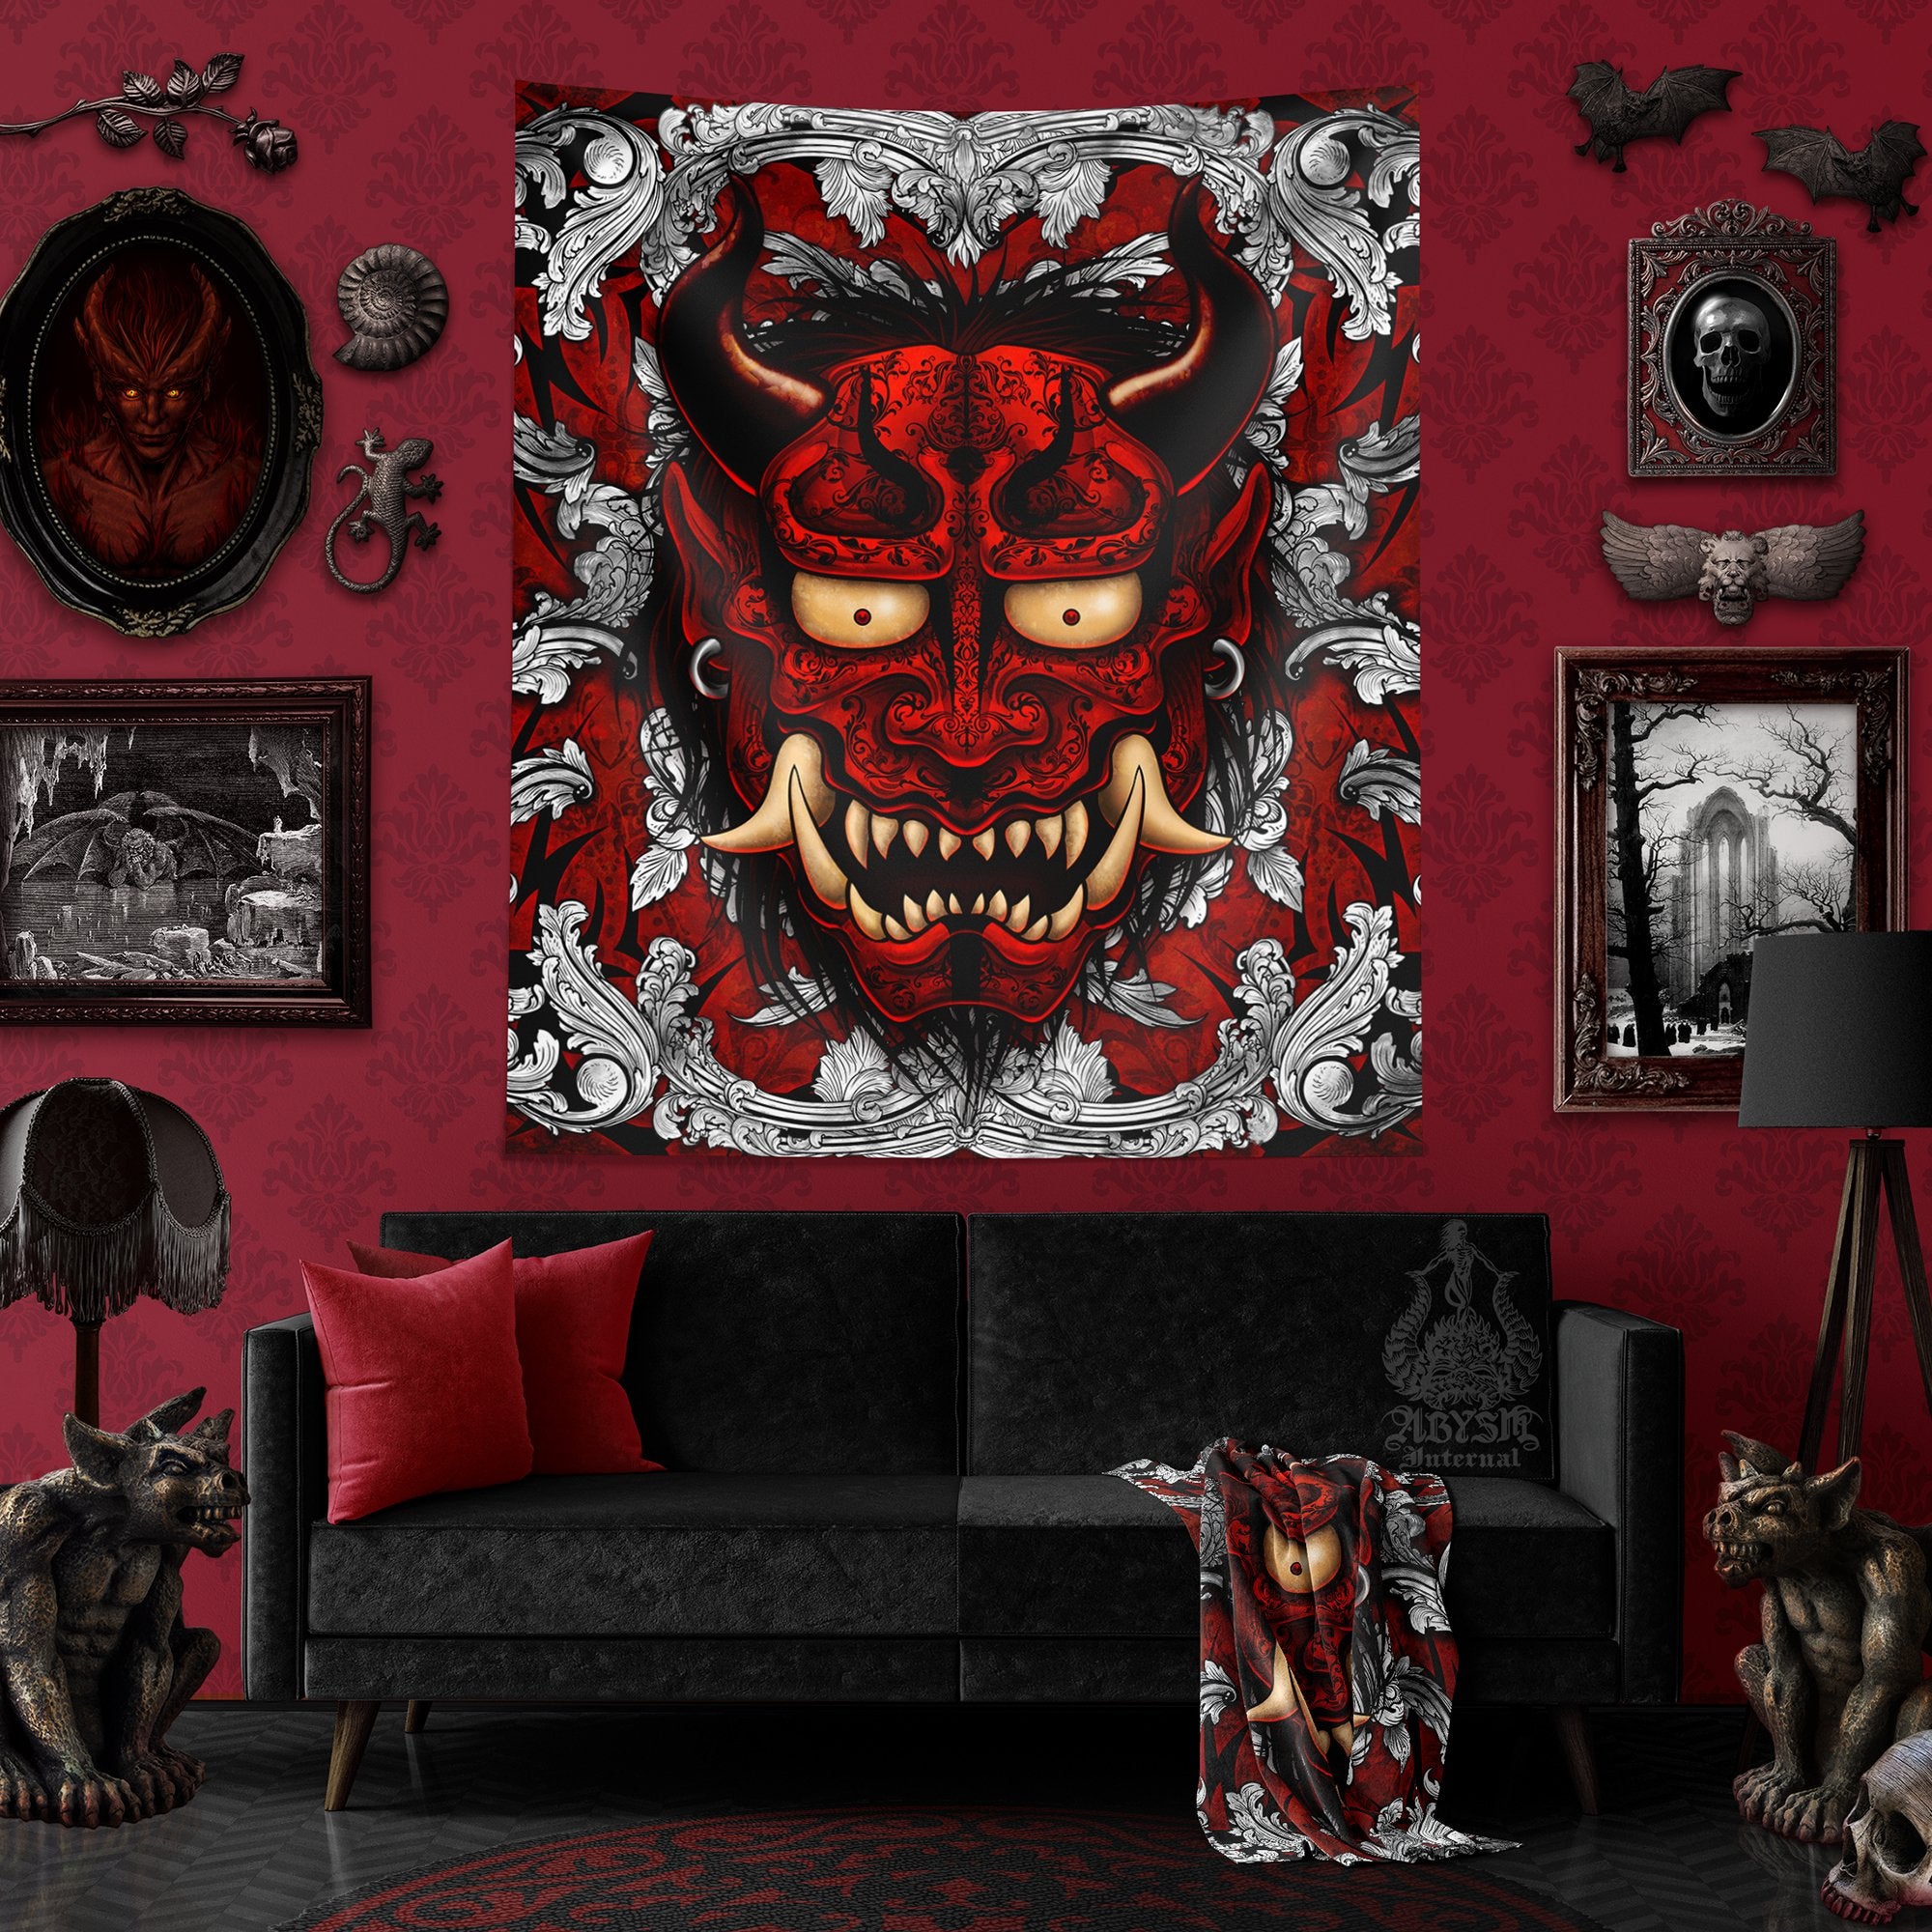 Silver Oni Tapestry, Goth Wall Hanging, Japanese Demon, Gamer Home Decor, Vertical Art Print - Black and Red, 2 Colors - Abysm Internal